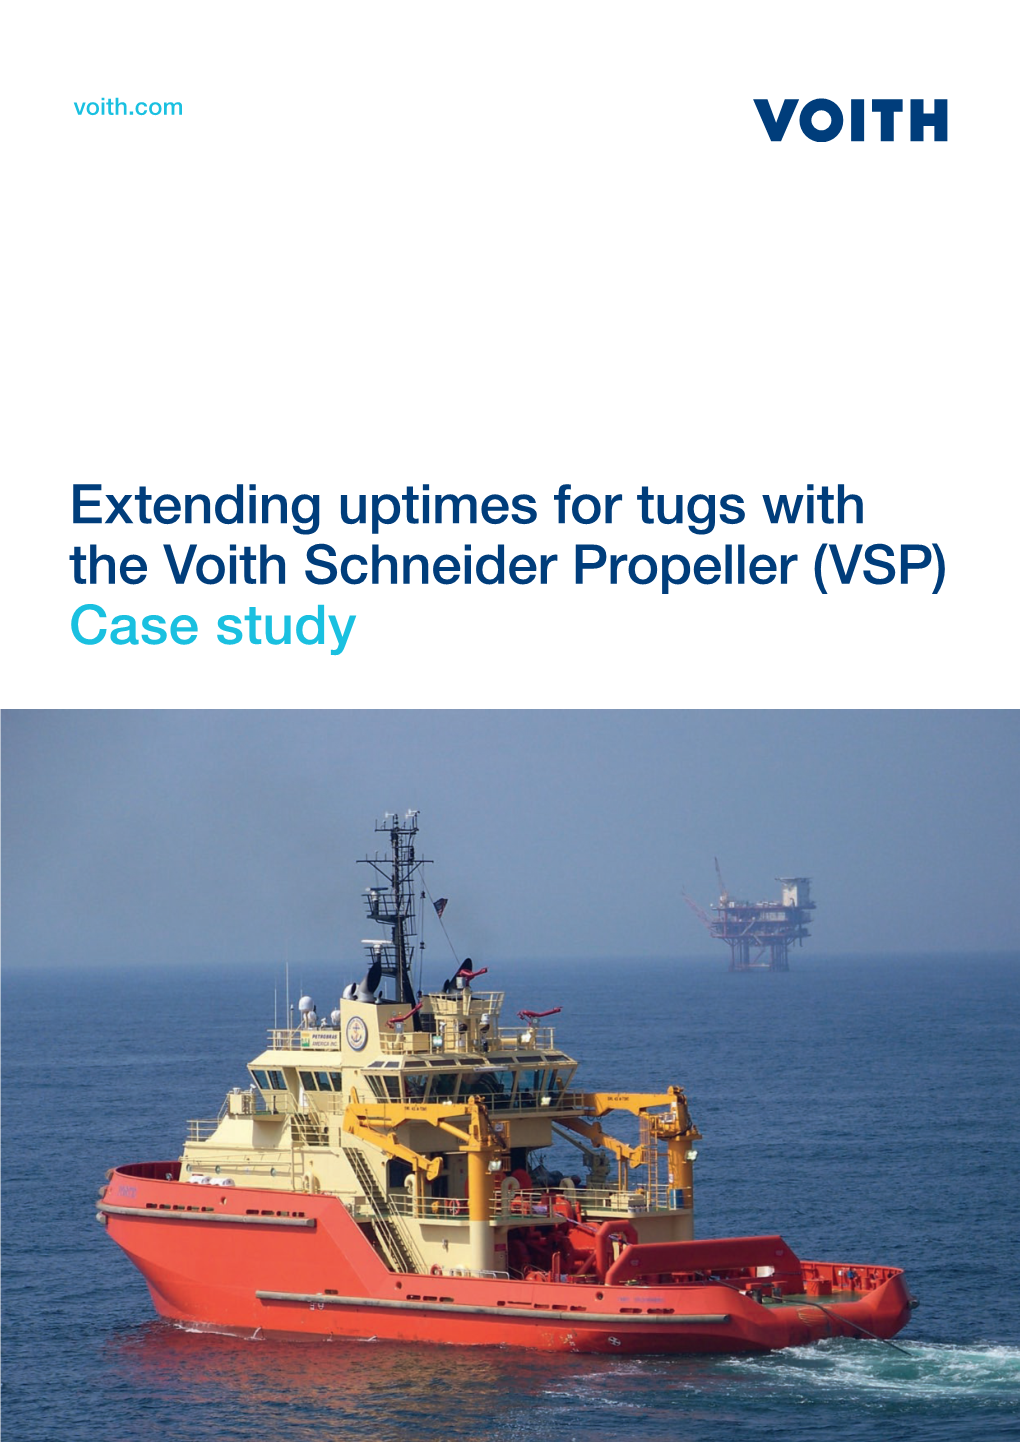 Extending Uptimes for Tugs with the Voith Schneider Propeller (VSP) Case Study SHIPBUILDING & EQUIPMENT PROPULSION & MANOEUVRING TECHNOLOGY